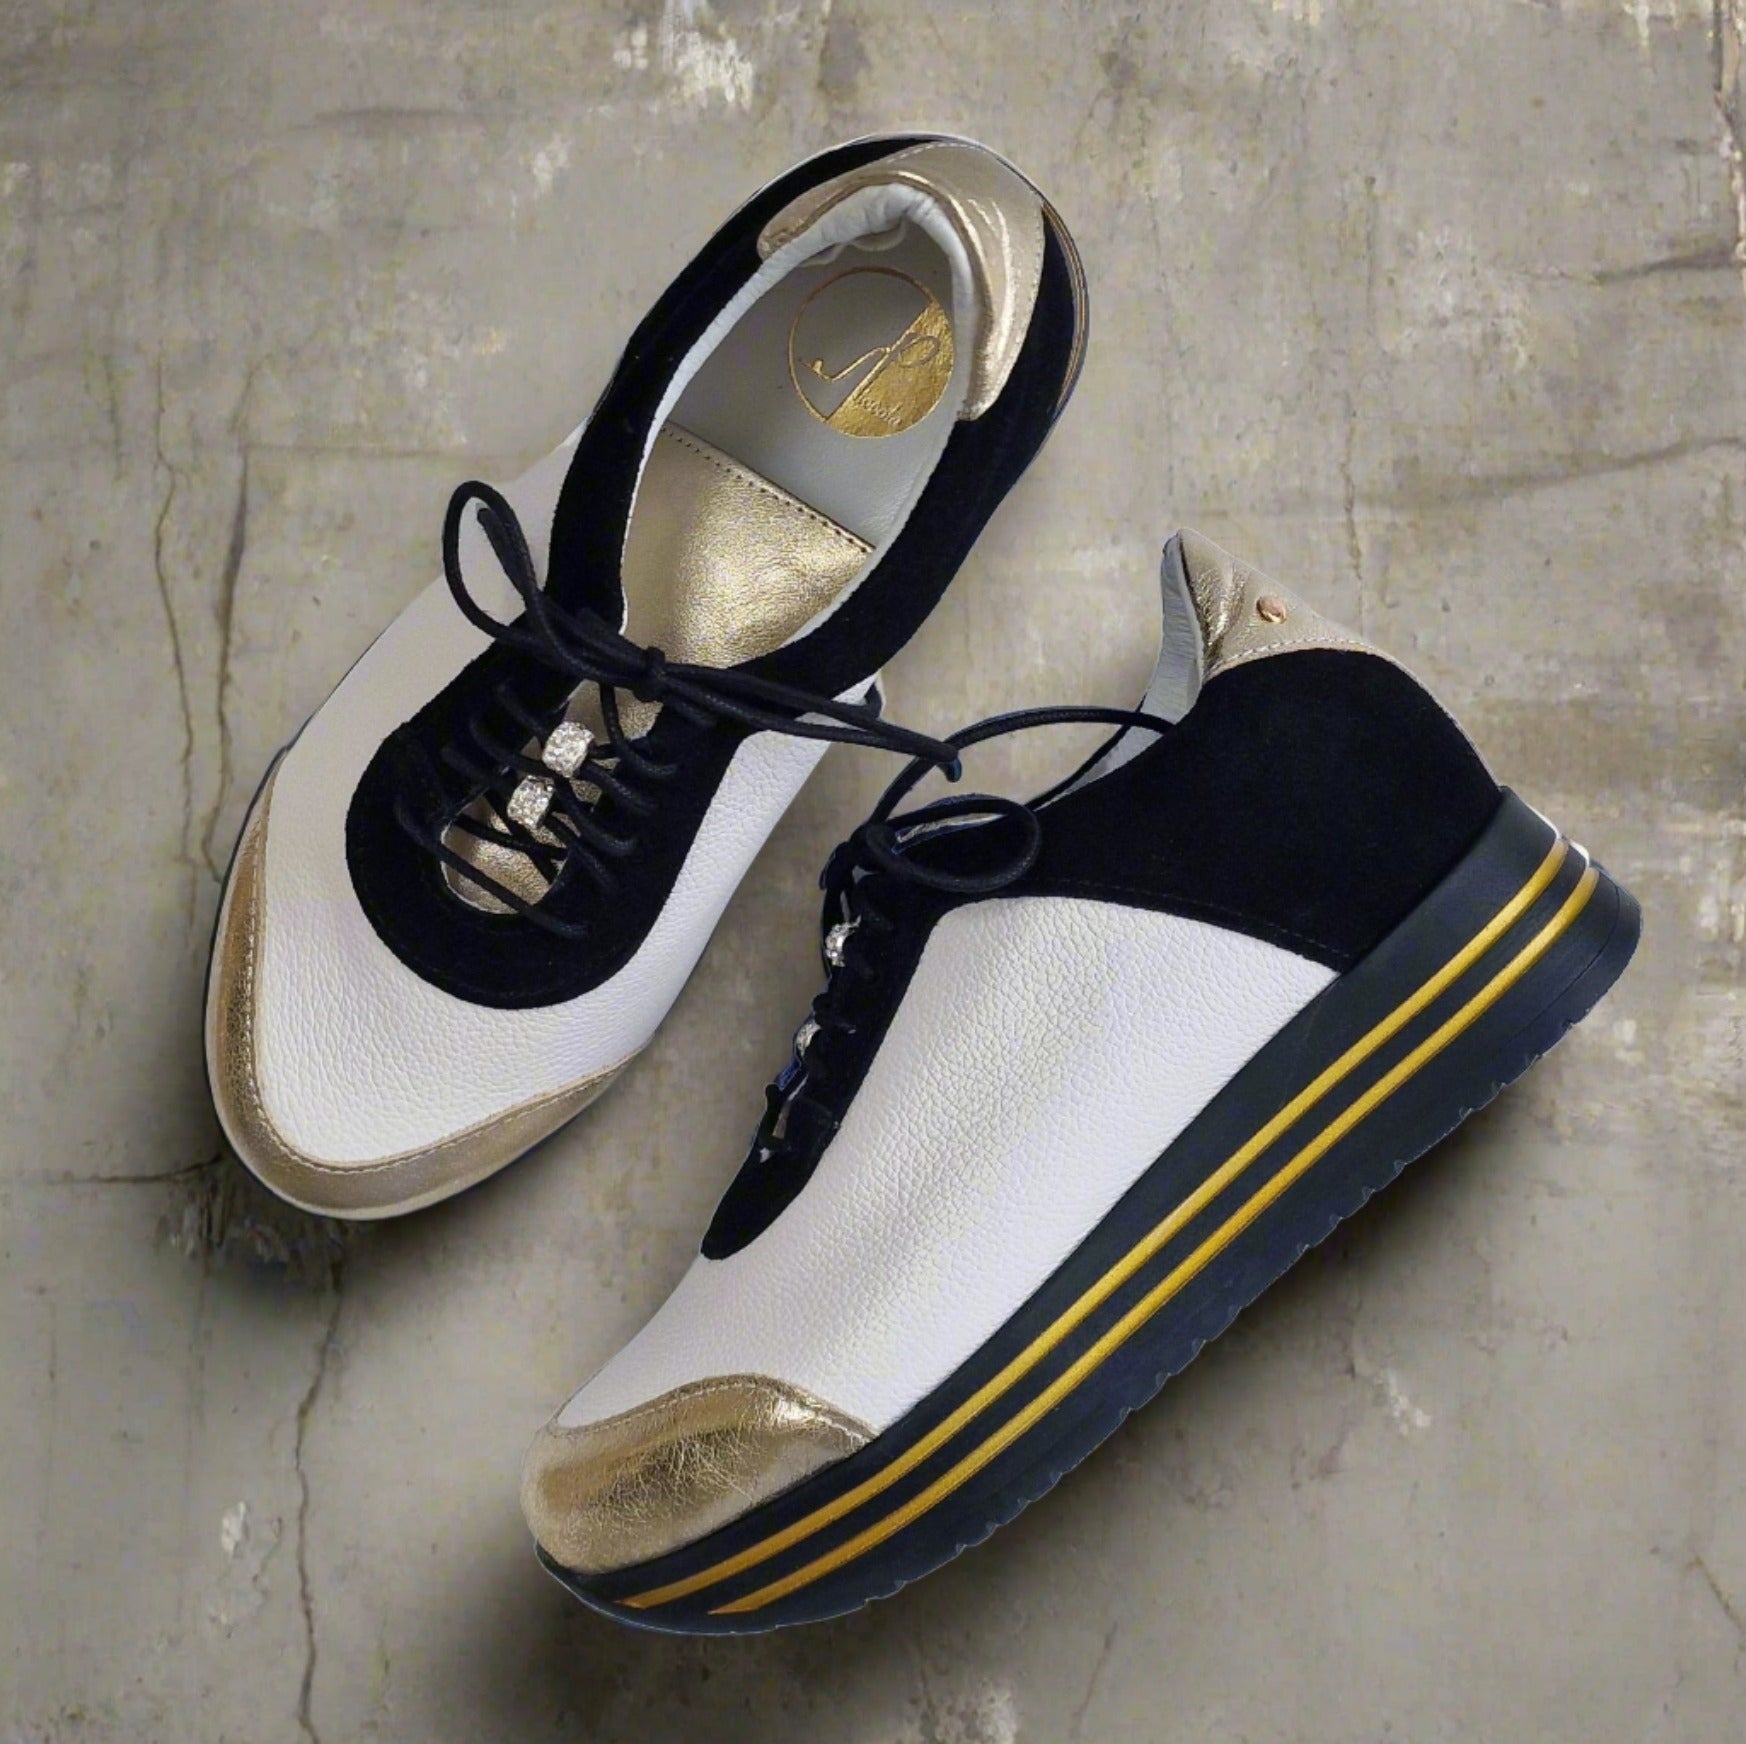 Gold and white leather ladies petite sneaker shoes